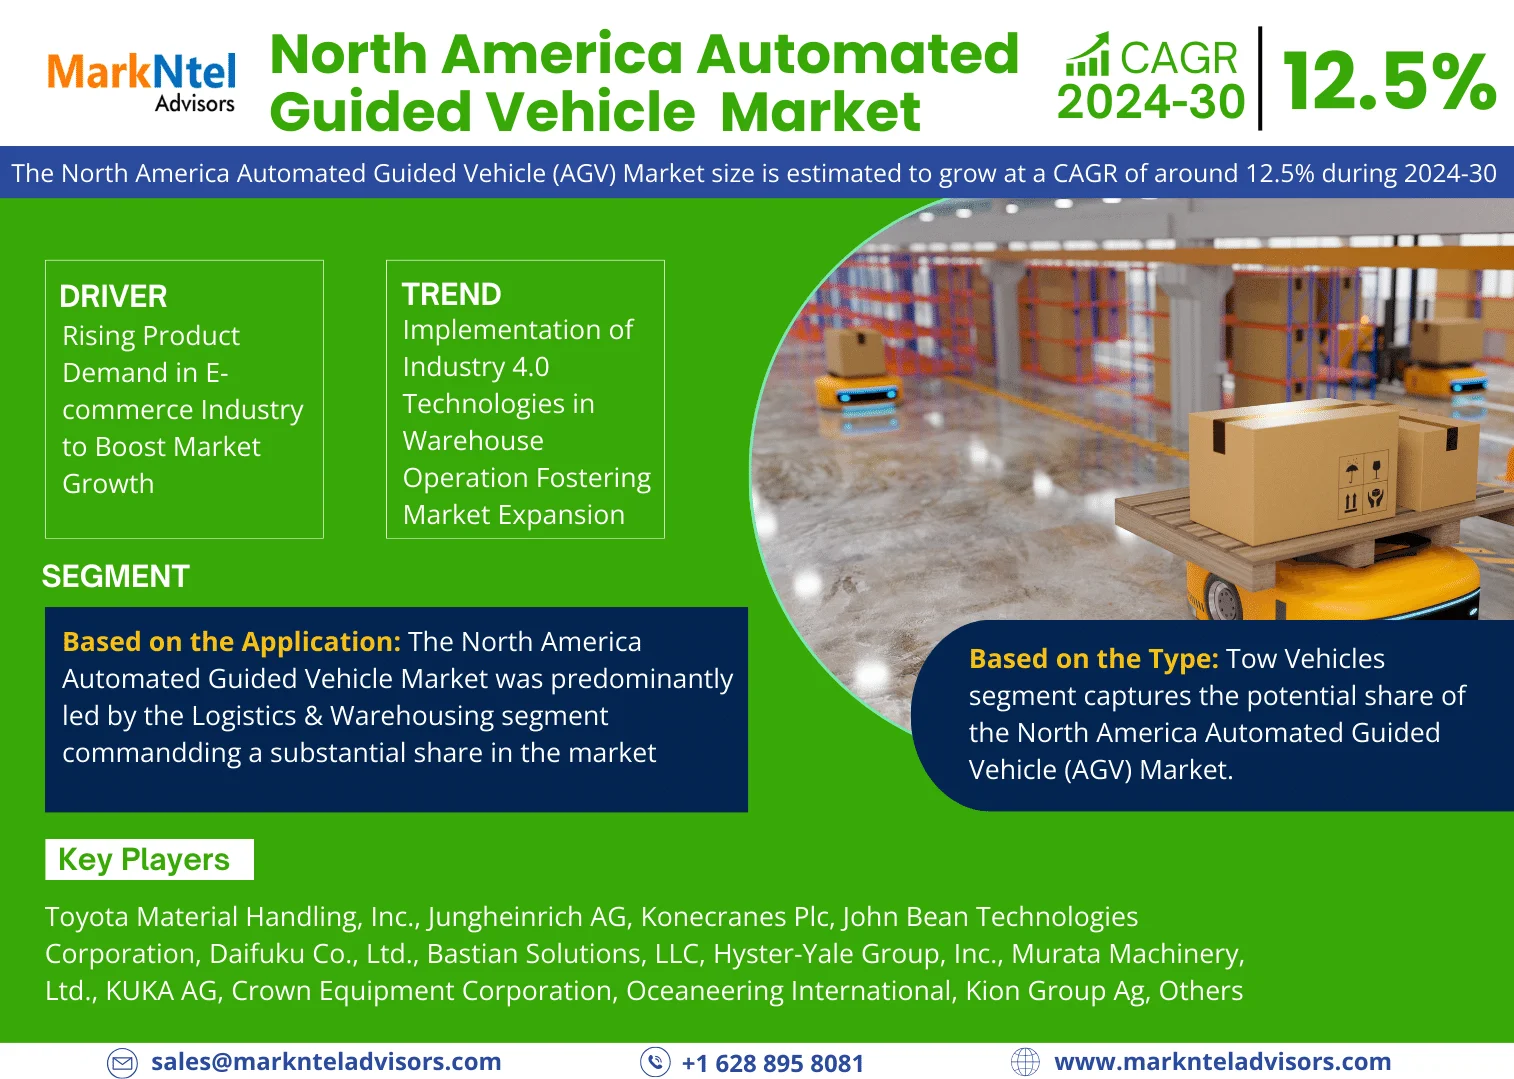 North America Automated Guided Vehicle (AGV) Market